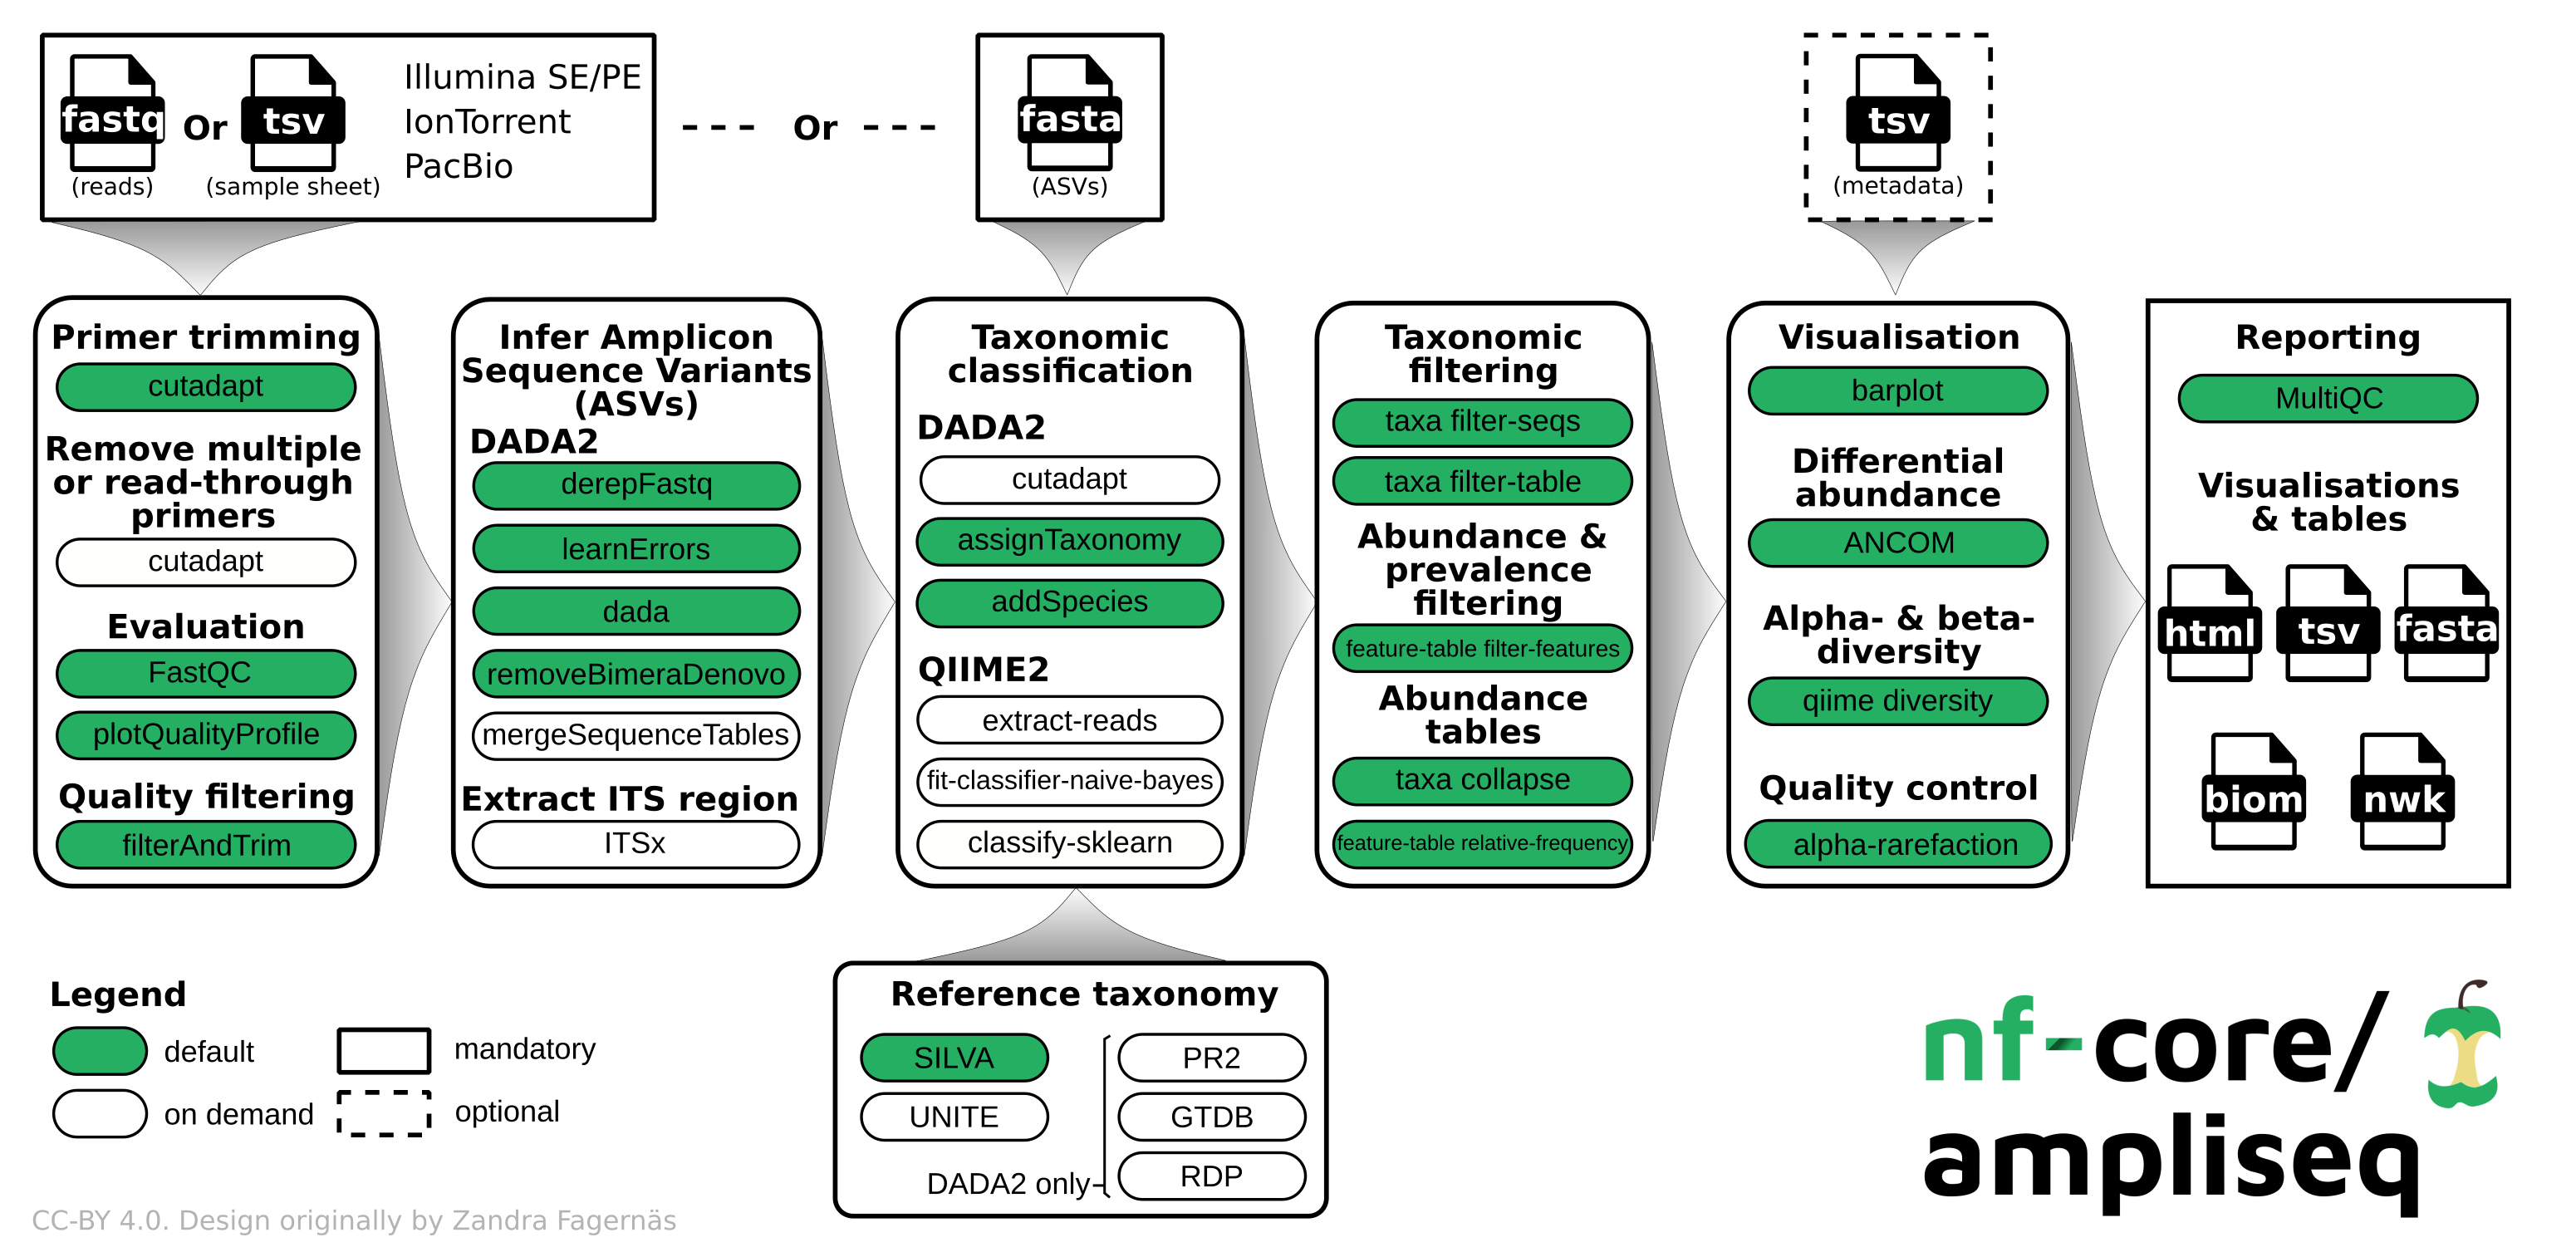 nf-core/ampliseq workflow overview